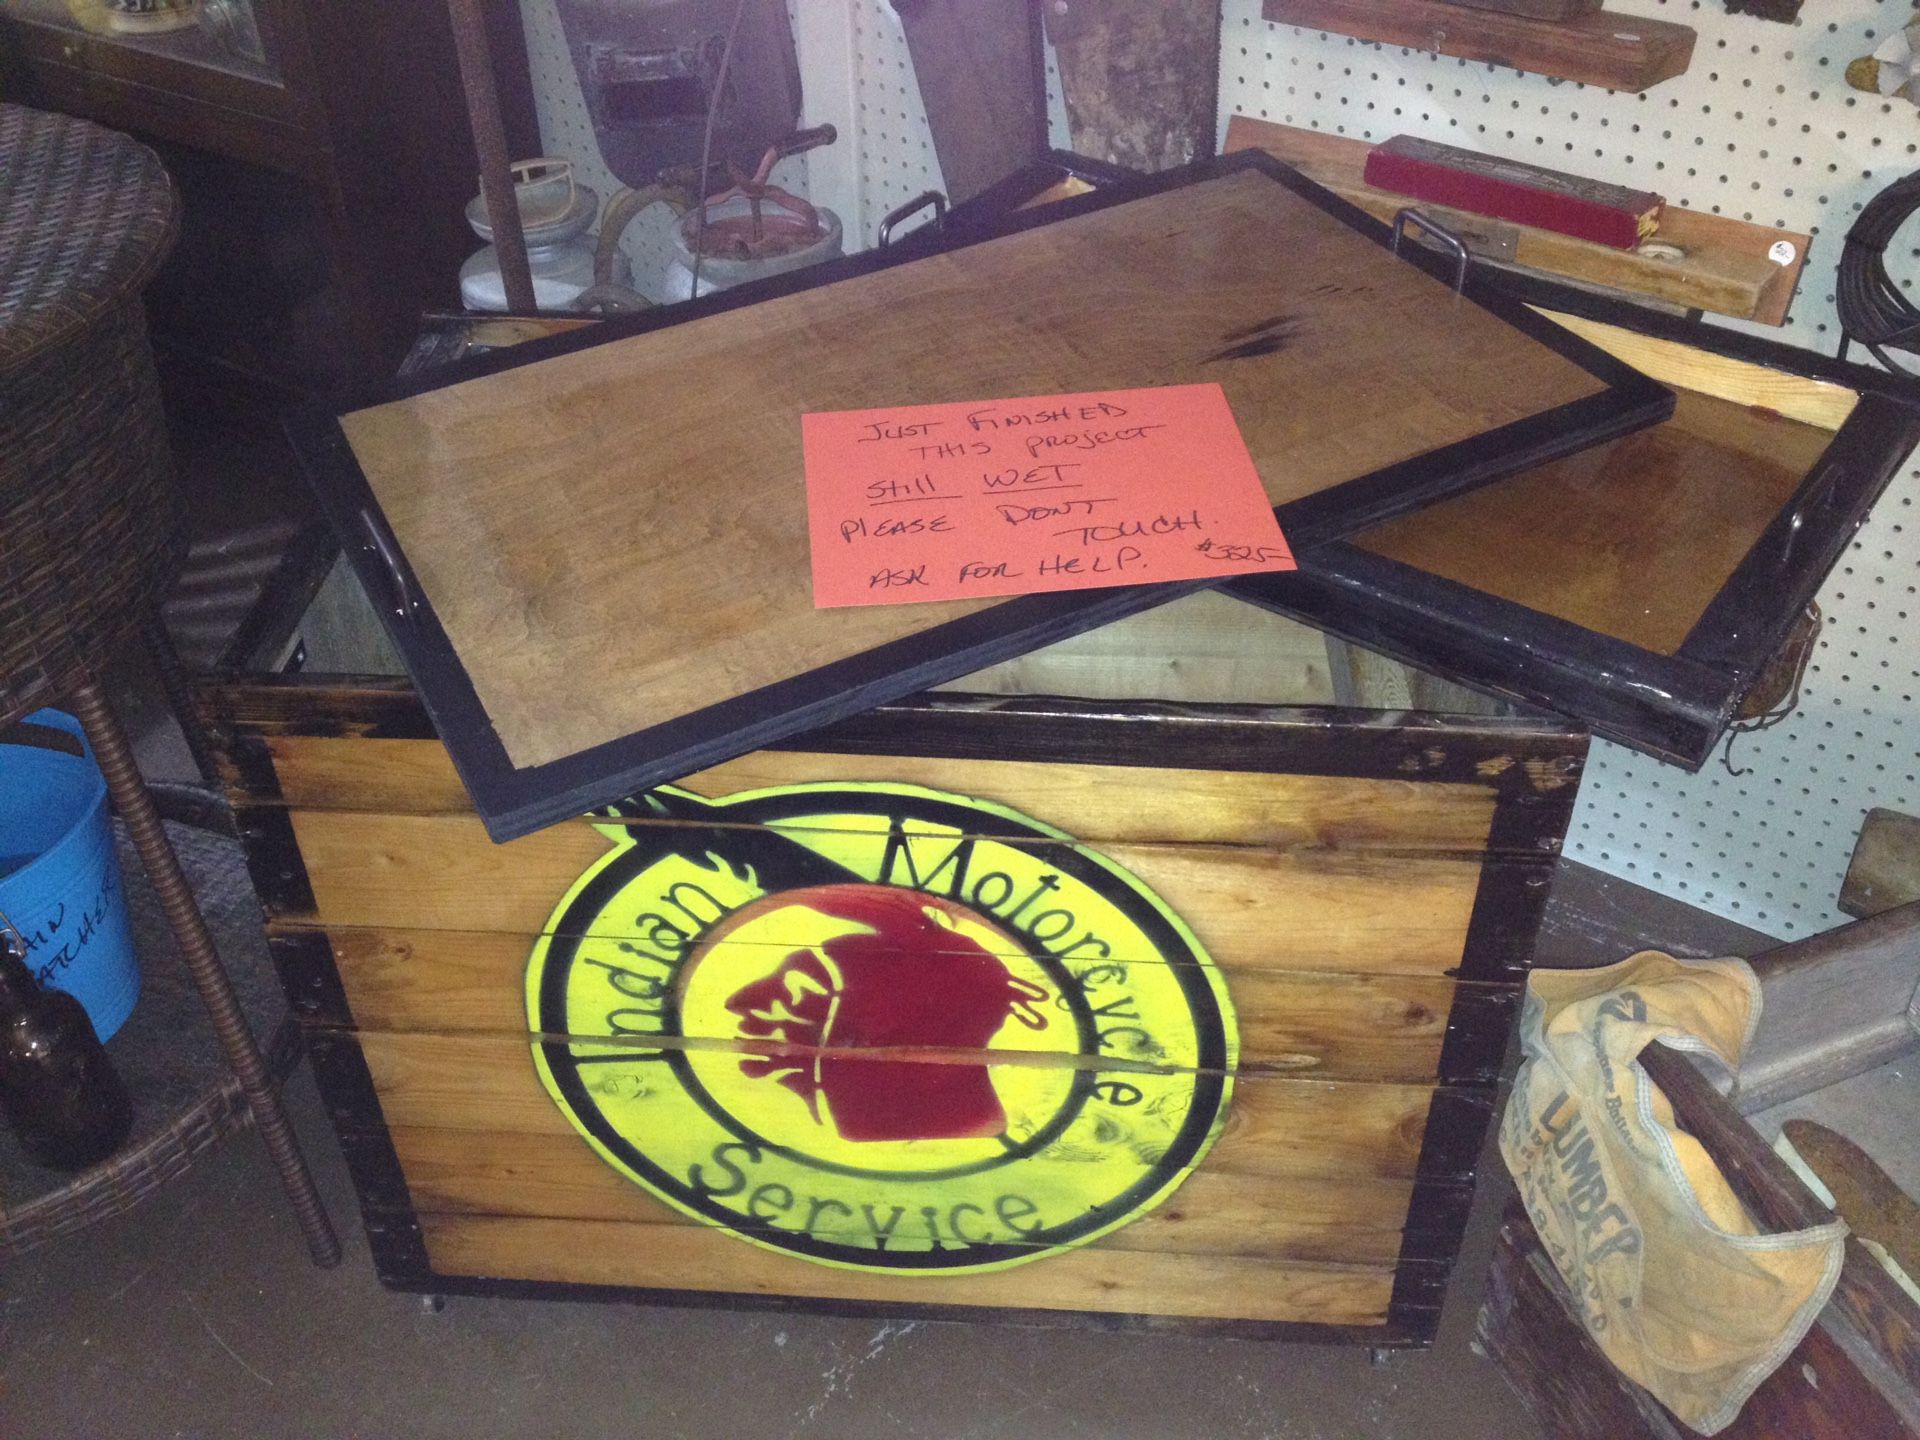 Indian motorcycle services crate. Has a pull out shelf and lid. Also on wheels. Great for storage. Dimensions are 32" long. 20" front to back. 26" ta